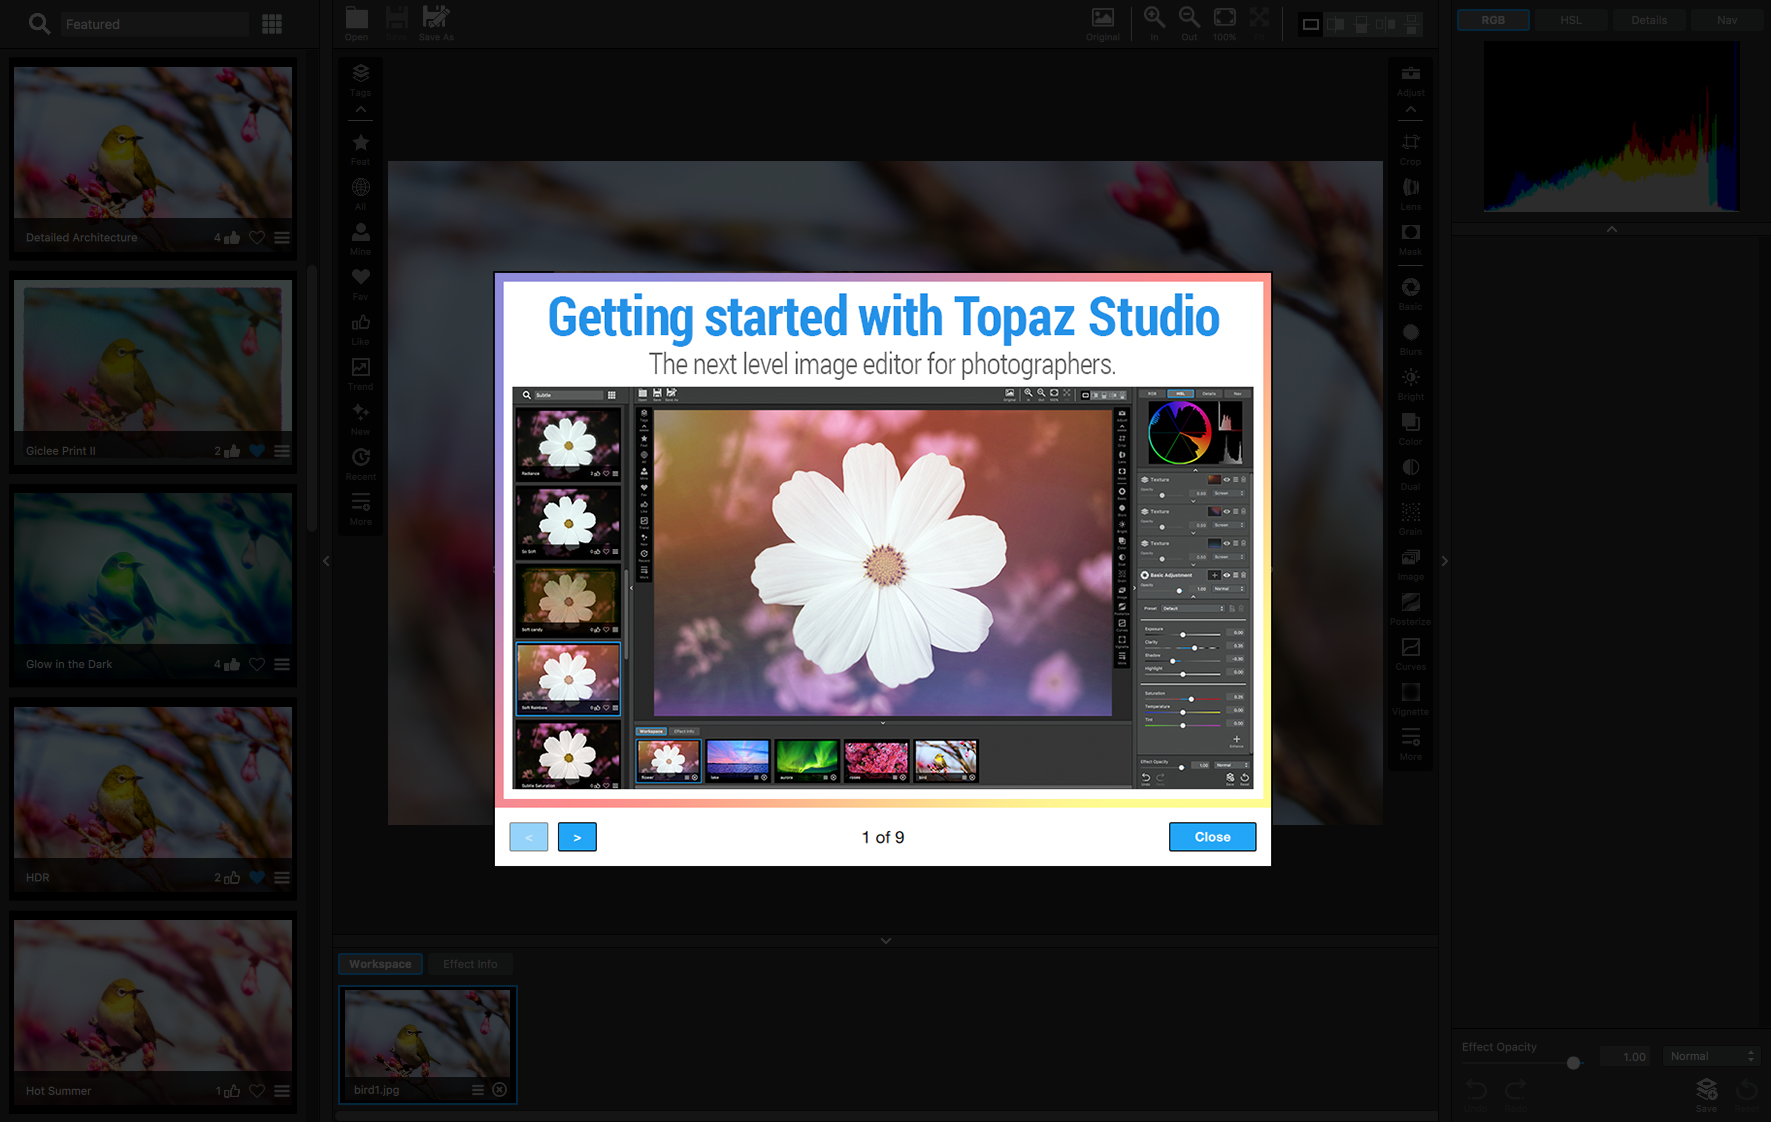 topaz studio 2 extremely slow at starting up